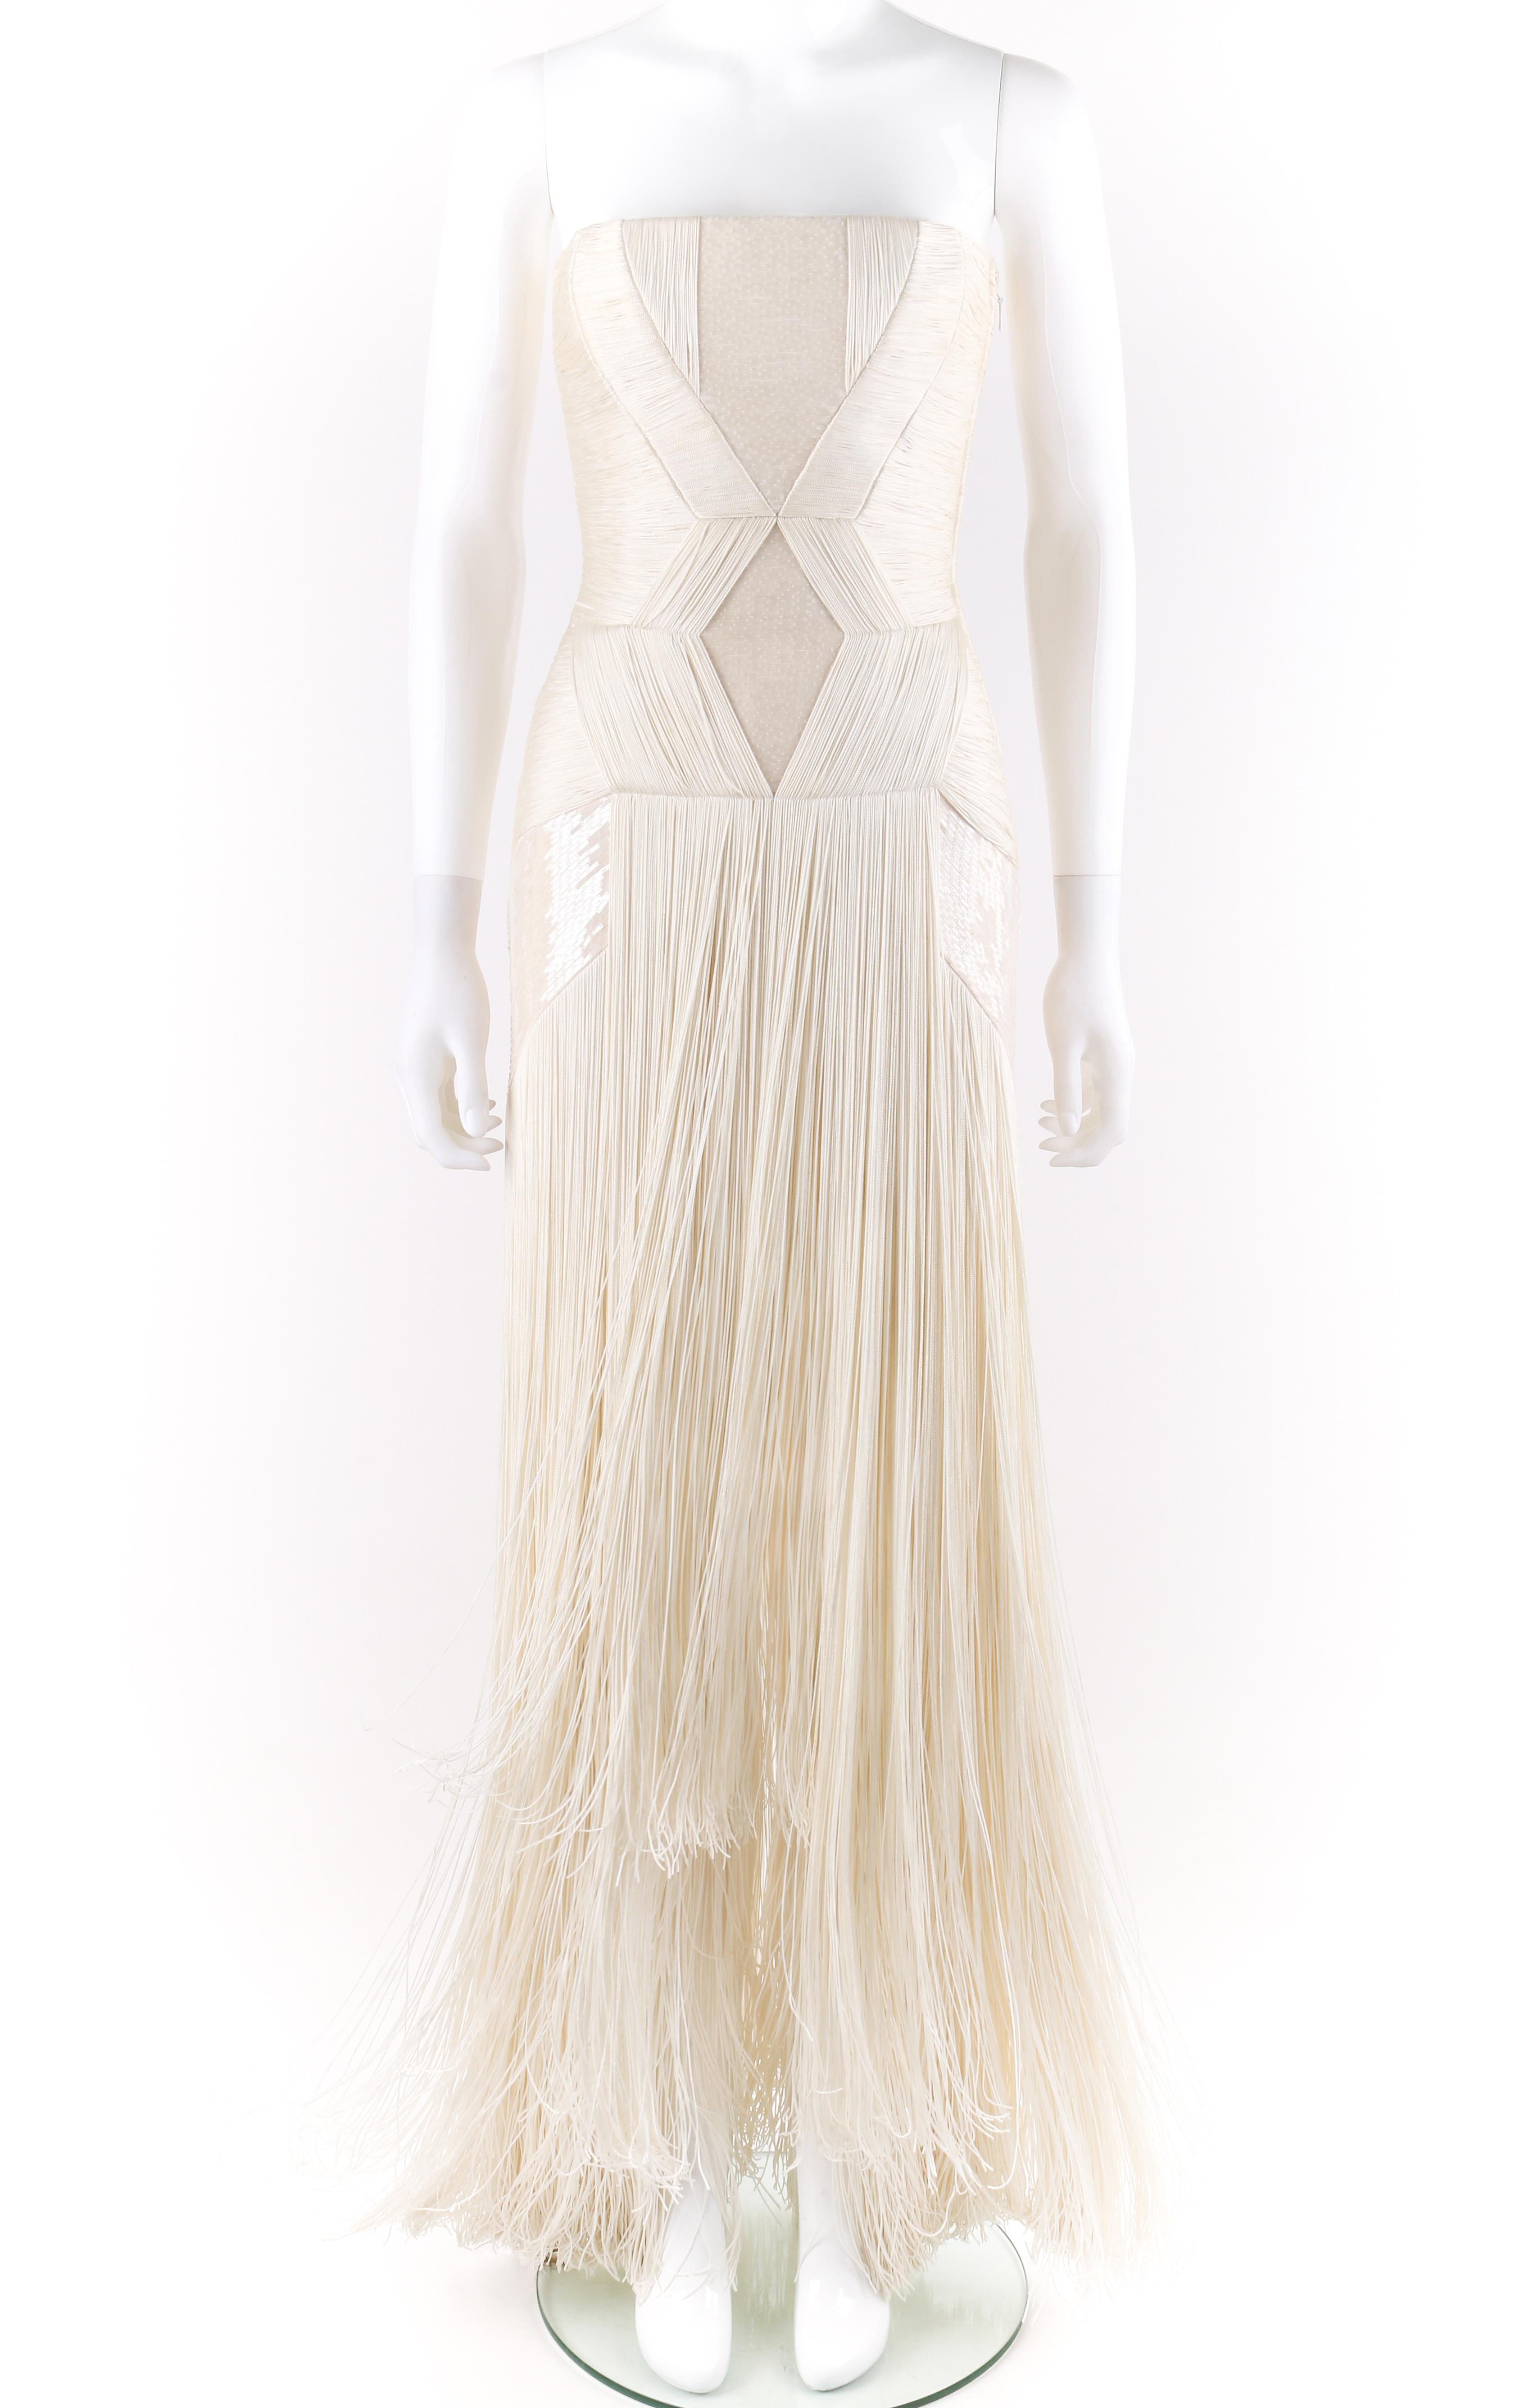 DESCRIPTION: Atelier VERSACE S/S 2011 White Sequin Embellished Fringe Art Deco Evening Gown
 
Brand / Manufacturer: Versace
Collection: Atelier; Spring / Summer 2011 Runway Look #46
Designer: Donatella Versace
Style: Evening gown
Color(s): Shades of